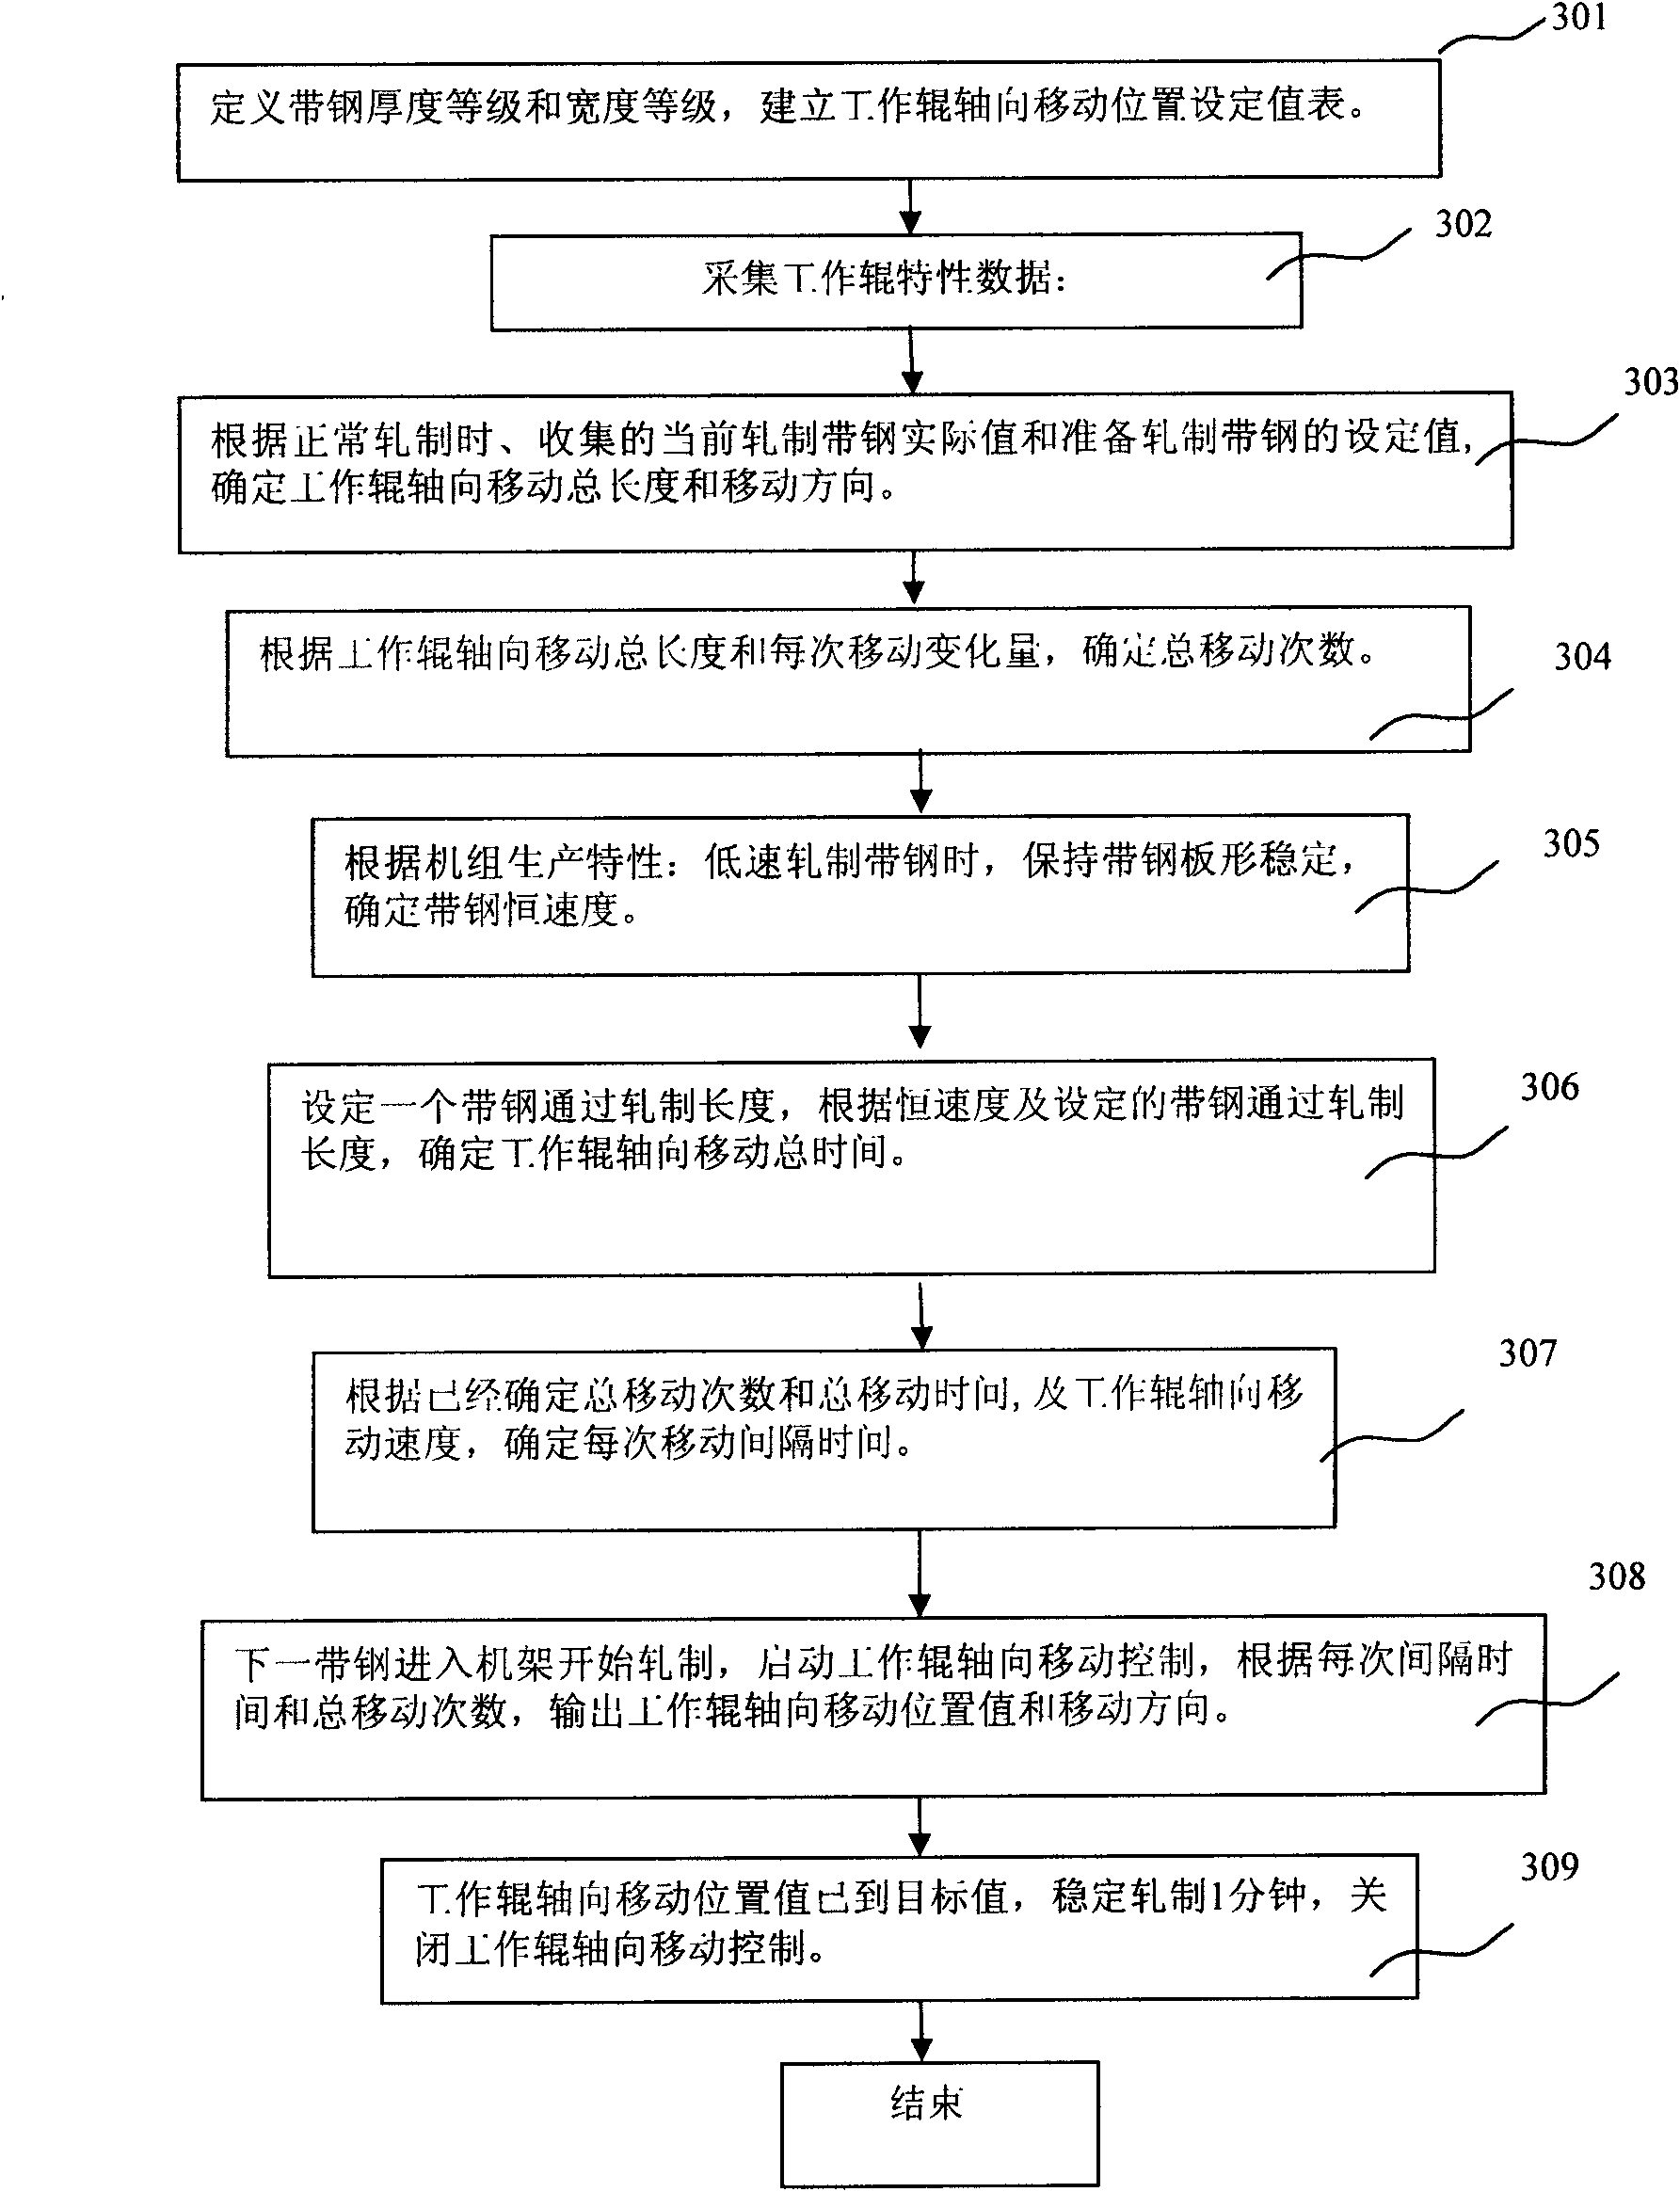 Axial movement control method for continuously variable crown (CVC) working roll